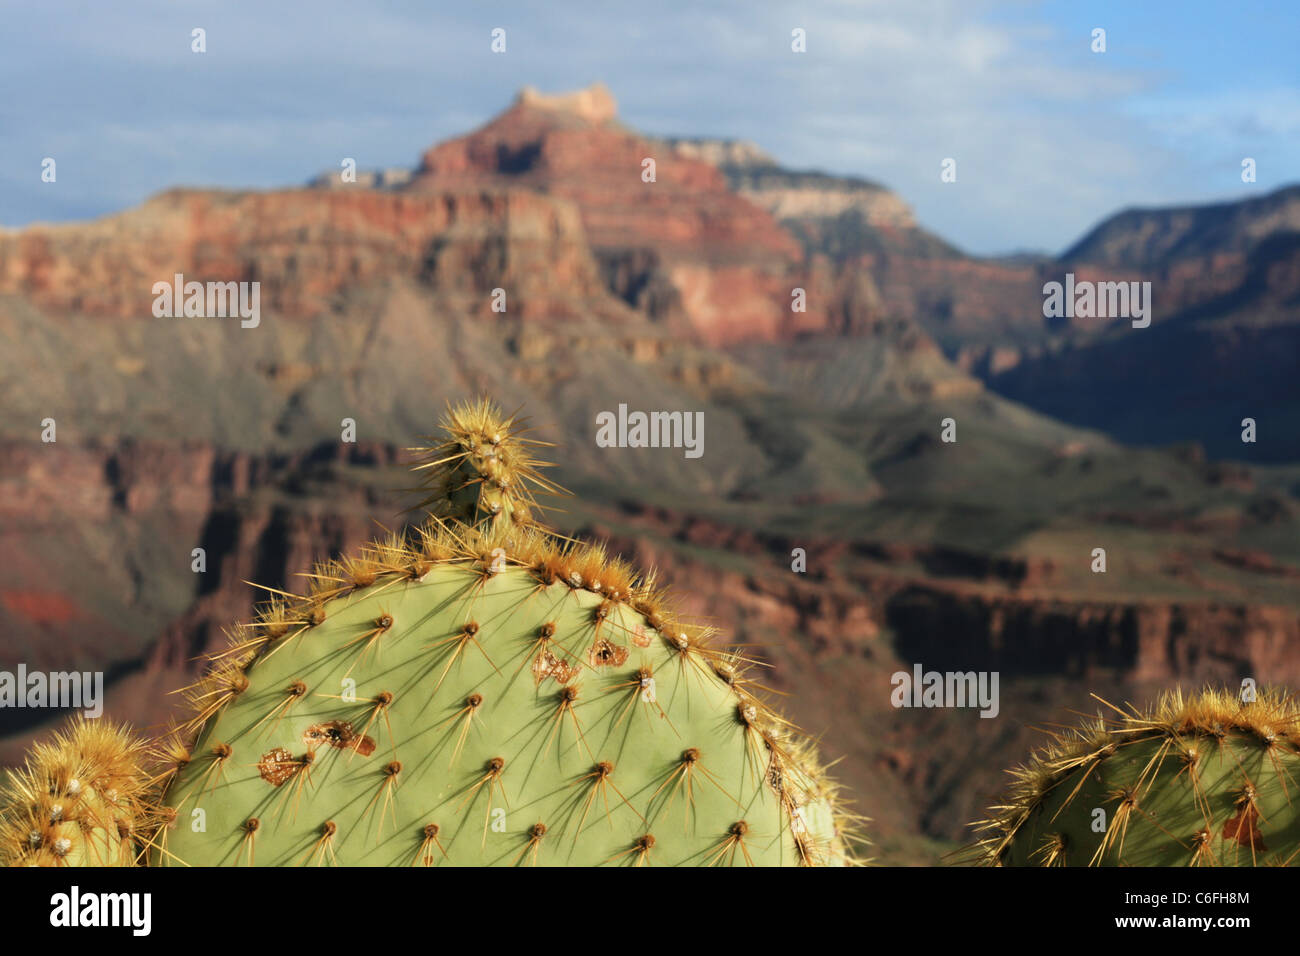 prickly pear cactus with out of focus Grand Canyon in the background Stock Photo